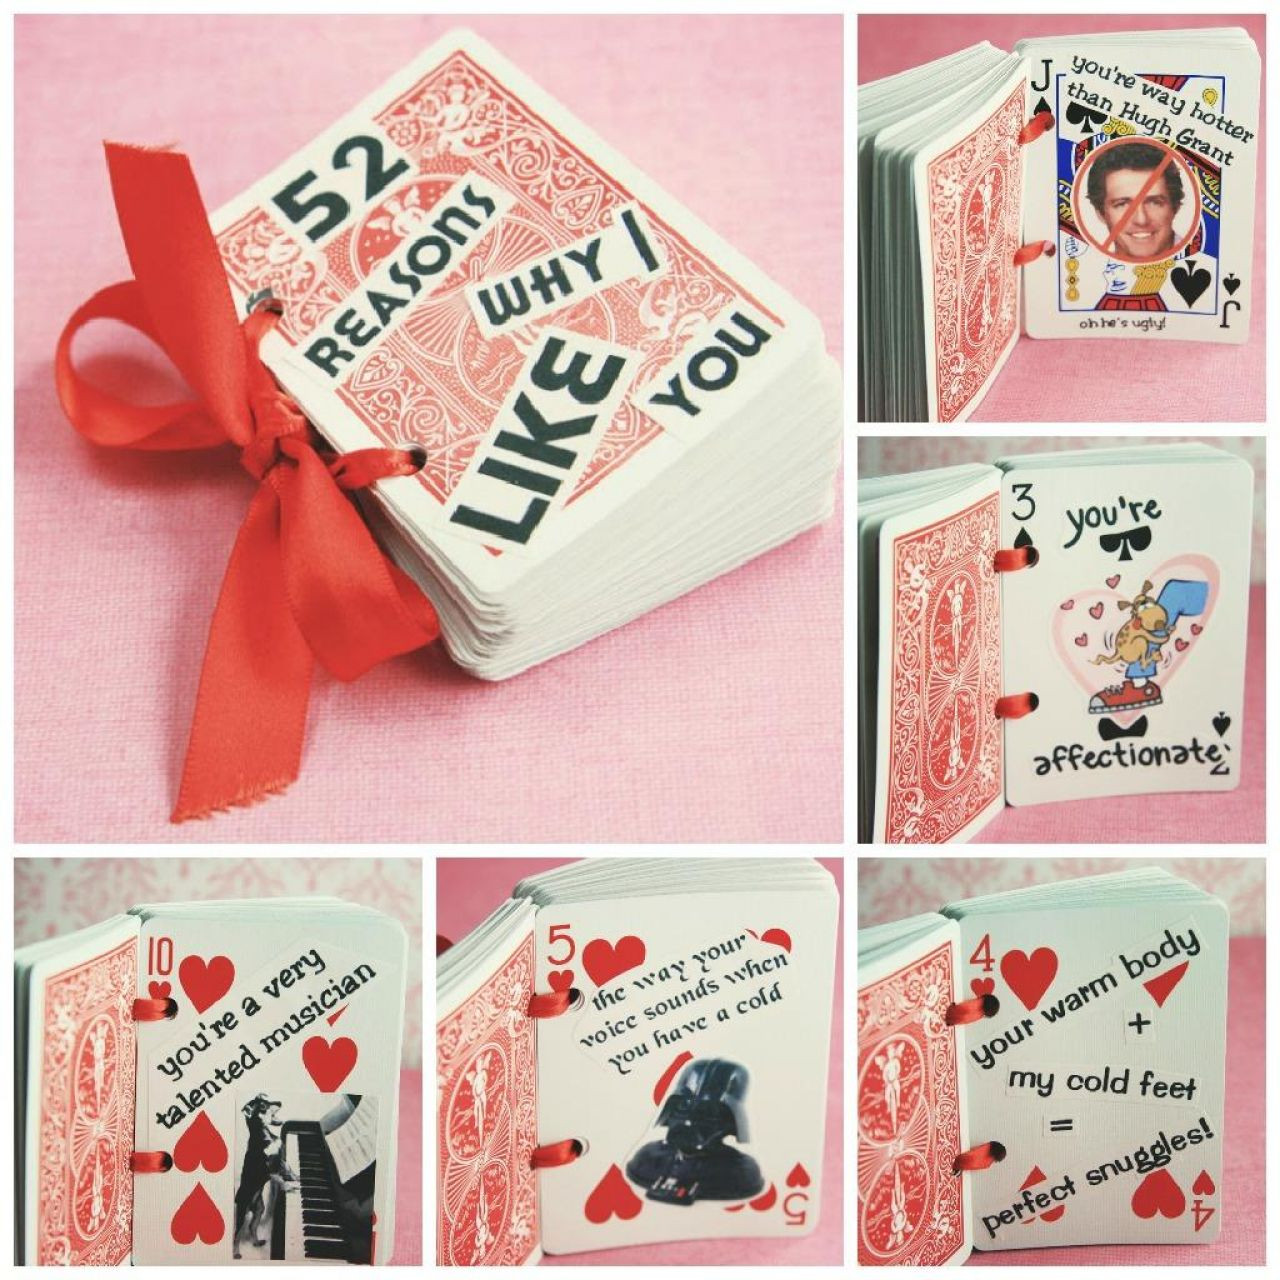 Cute Ideas For Valentines Day For Him
 17 Last Minute Handmade Valentine Gifts for Him